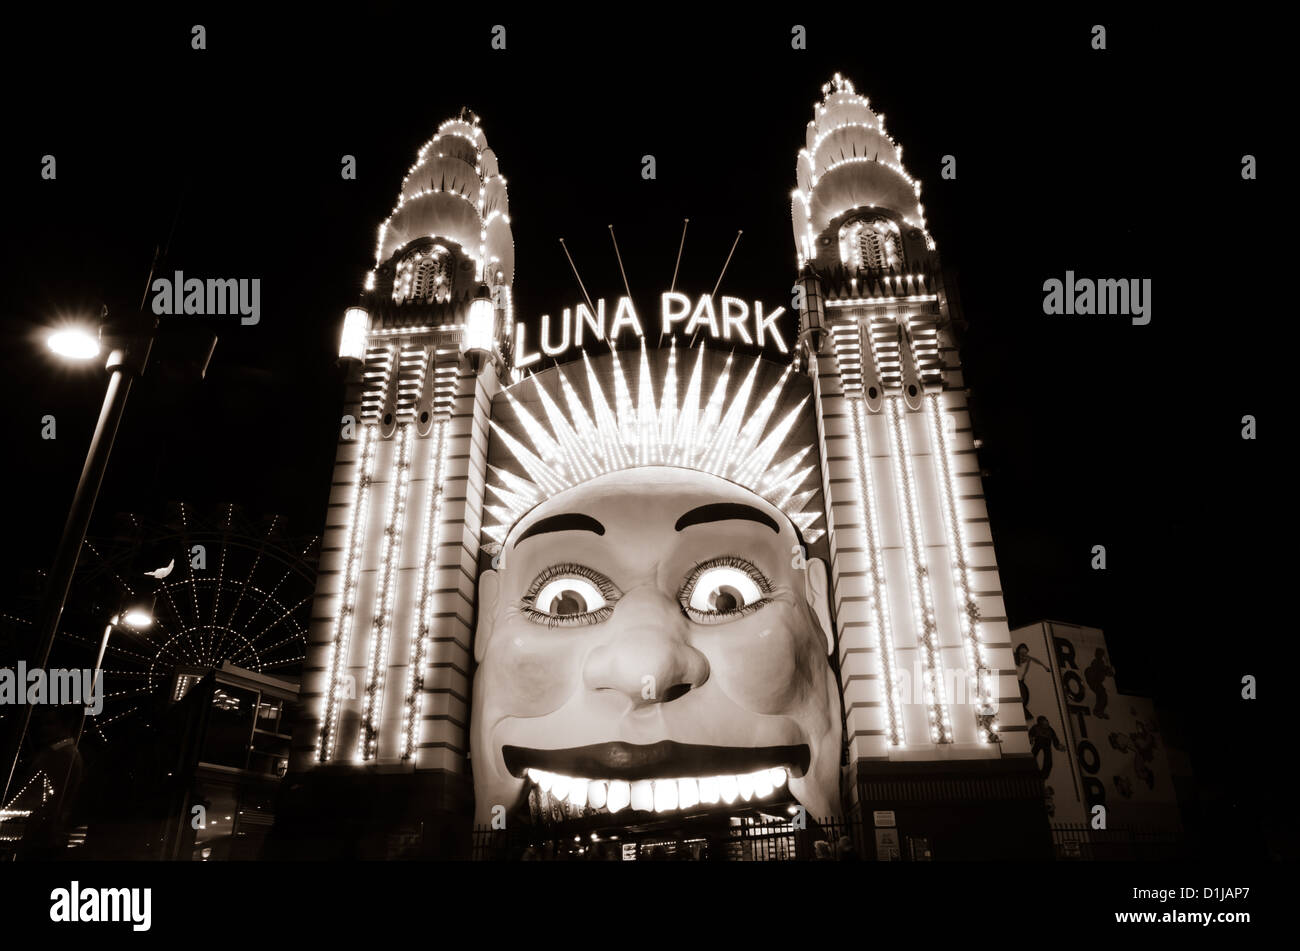 Entrance gate of Luna Park in Syndey, Australia Stock Photo